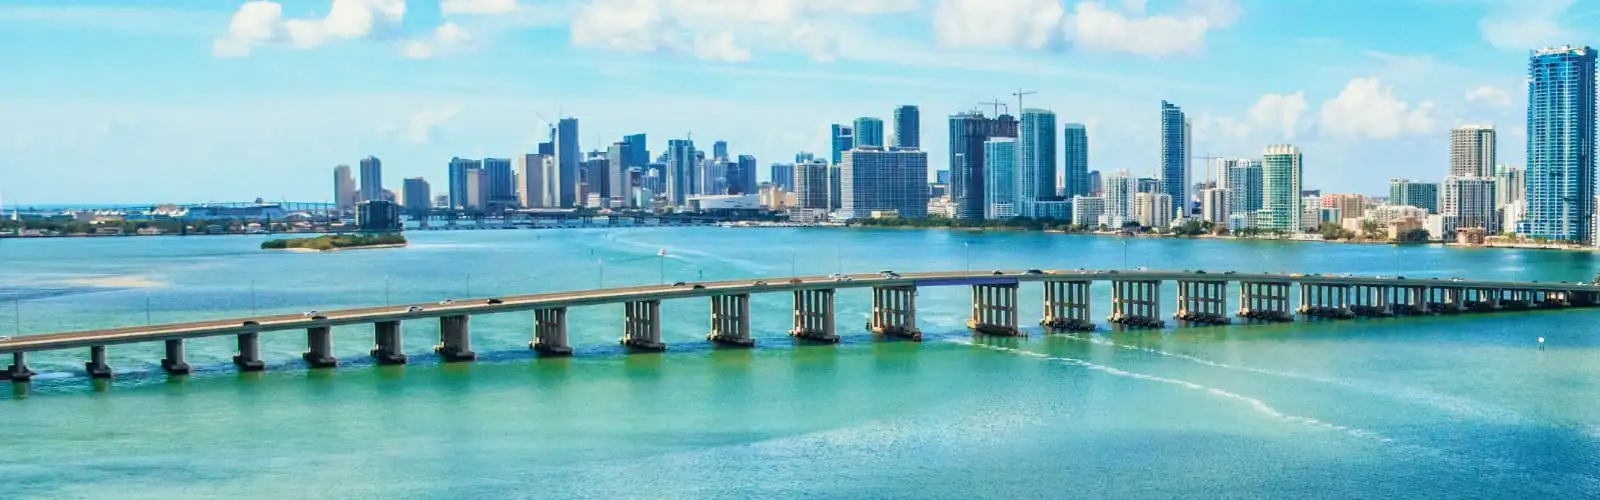 A panoramic view of the downtown skyline of Miami, Florida from over the Biscayne Bay. Find Florida Insurance